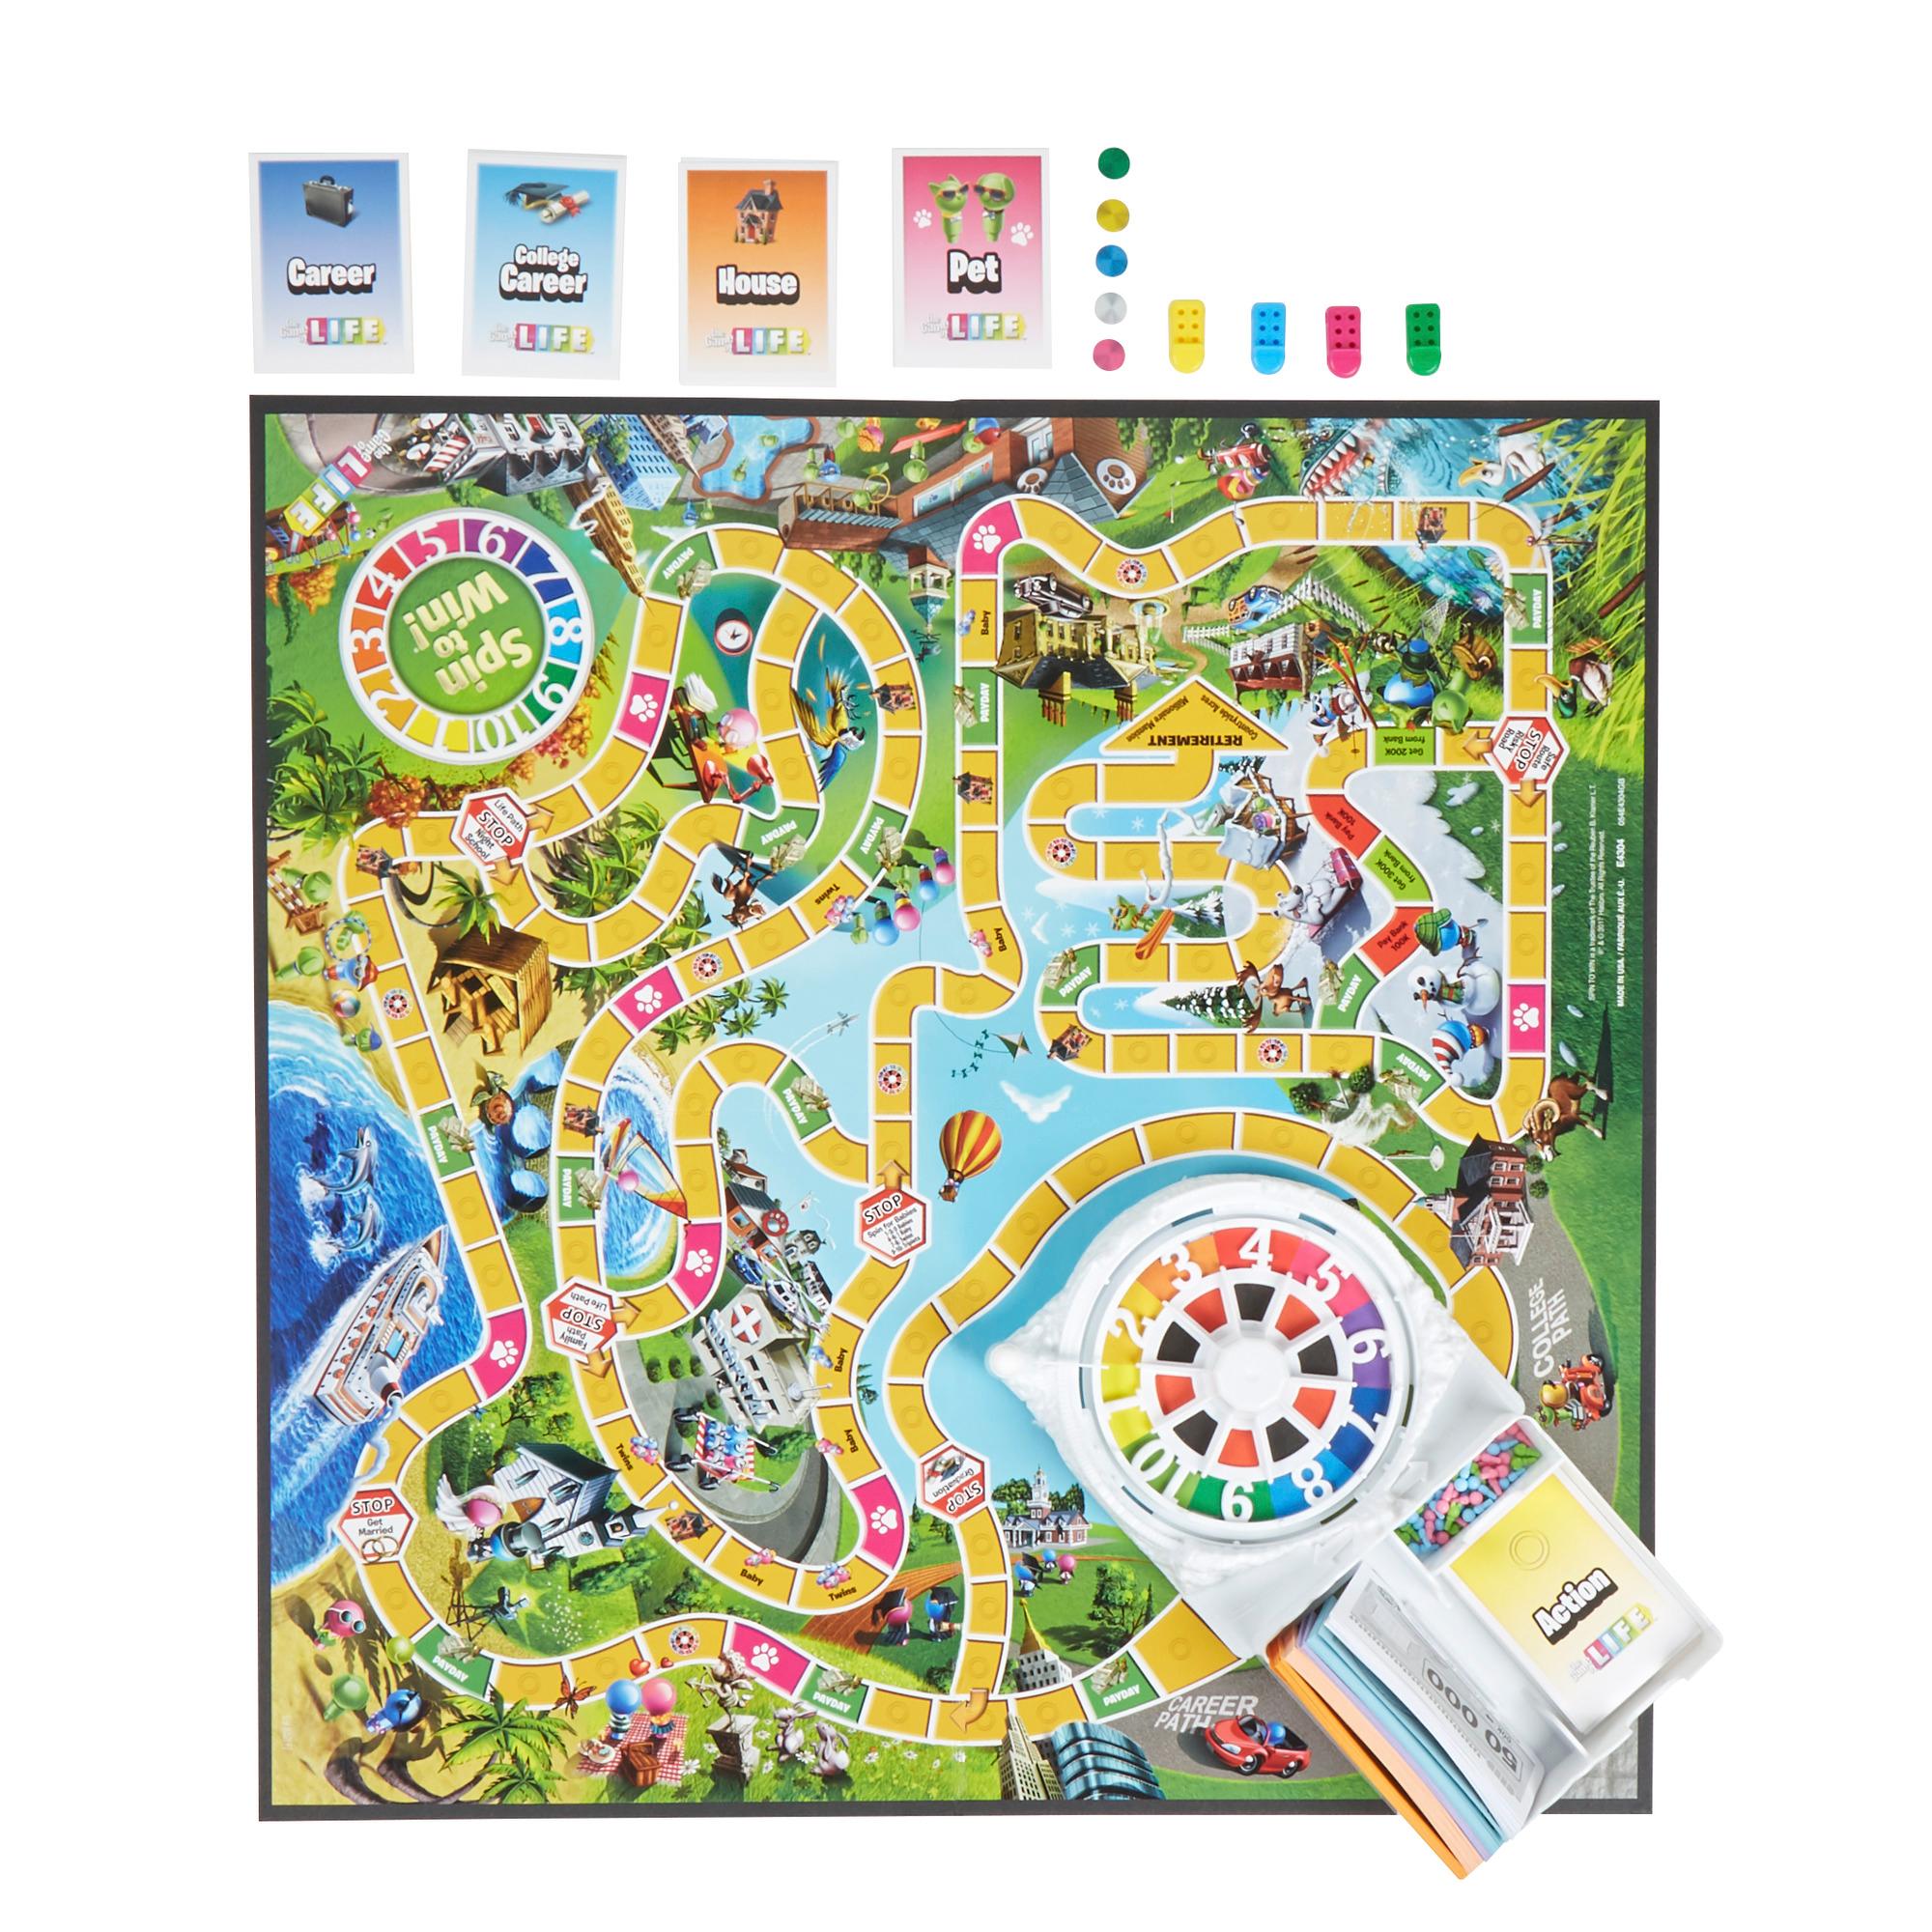 The Game Of Life Rules - Learning Board Games